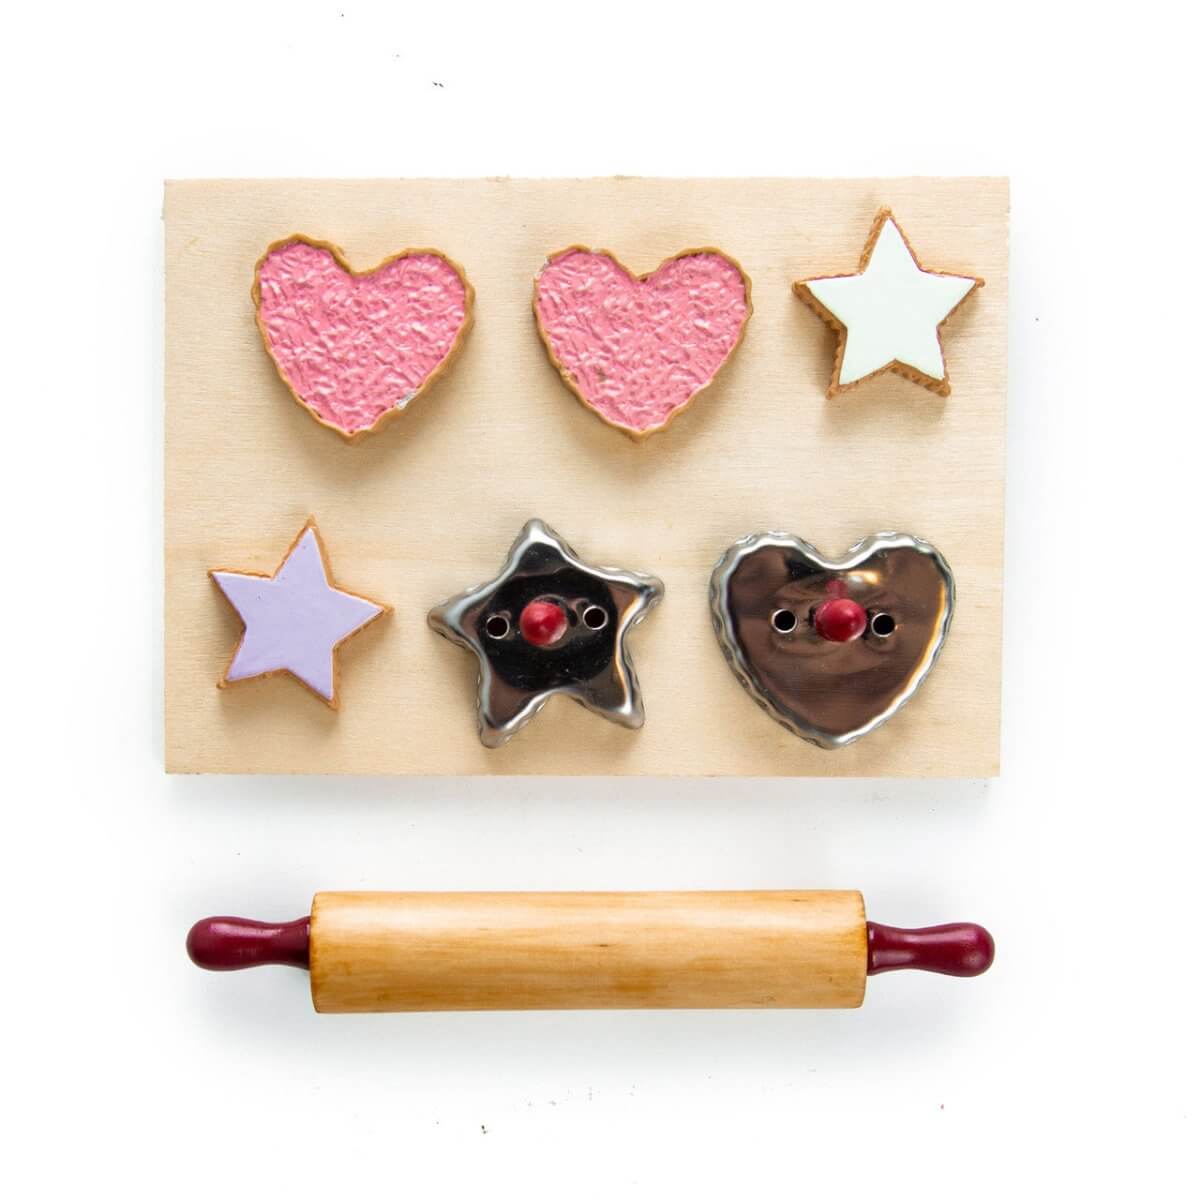 8 Piece Cookie Baking Gift Set with Tools & Cookies, Accessories for 18 Inch Dolls - Simon's Collectibles